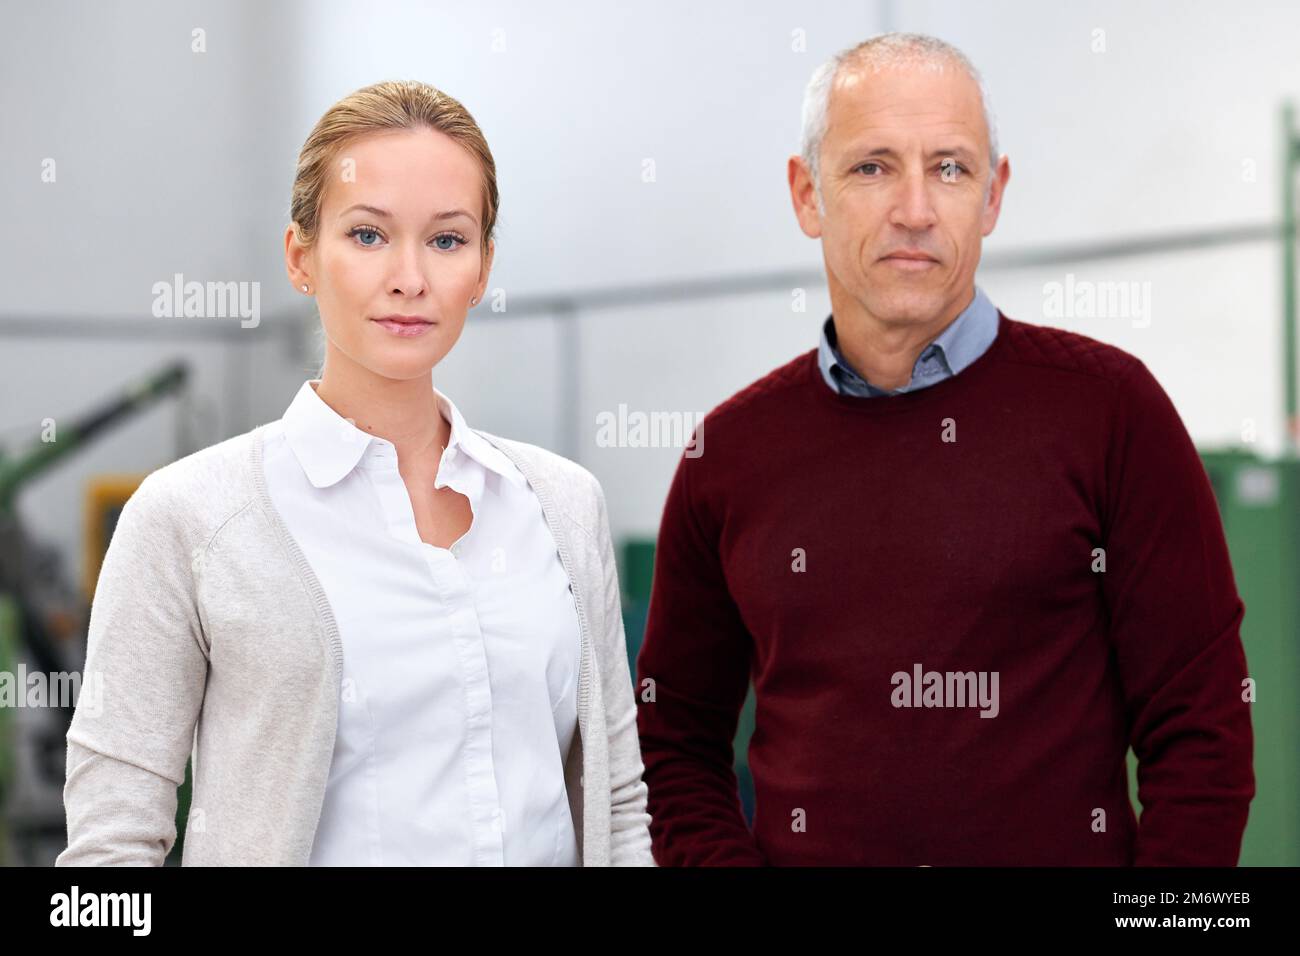 You better be ready for us. Portrait of two factory managers on a warehouse inspection. Stock Photo